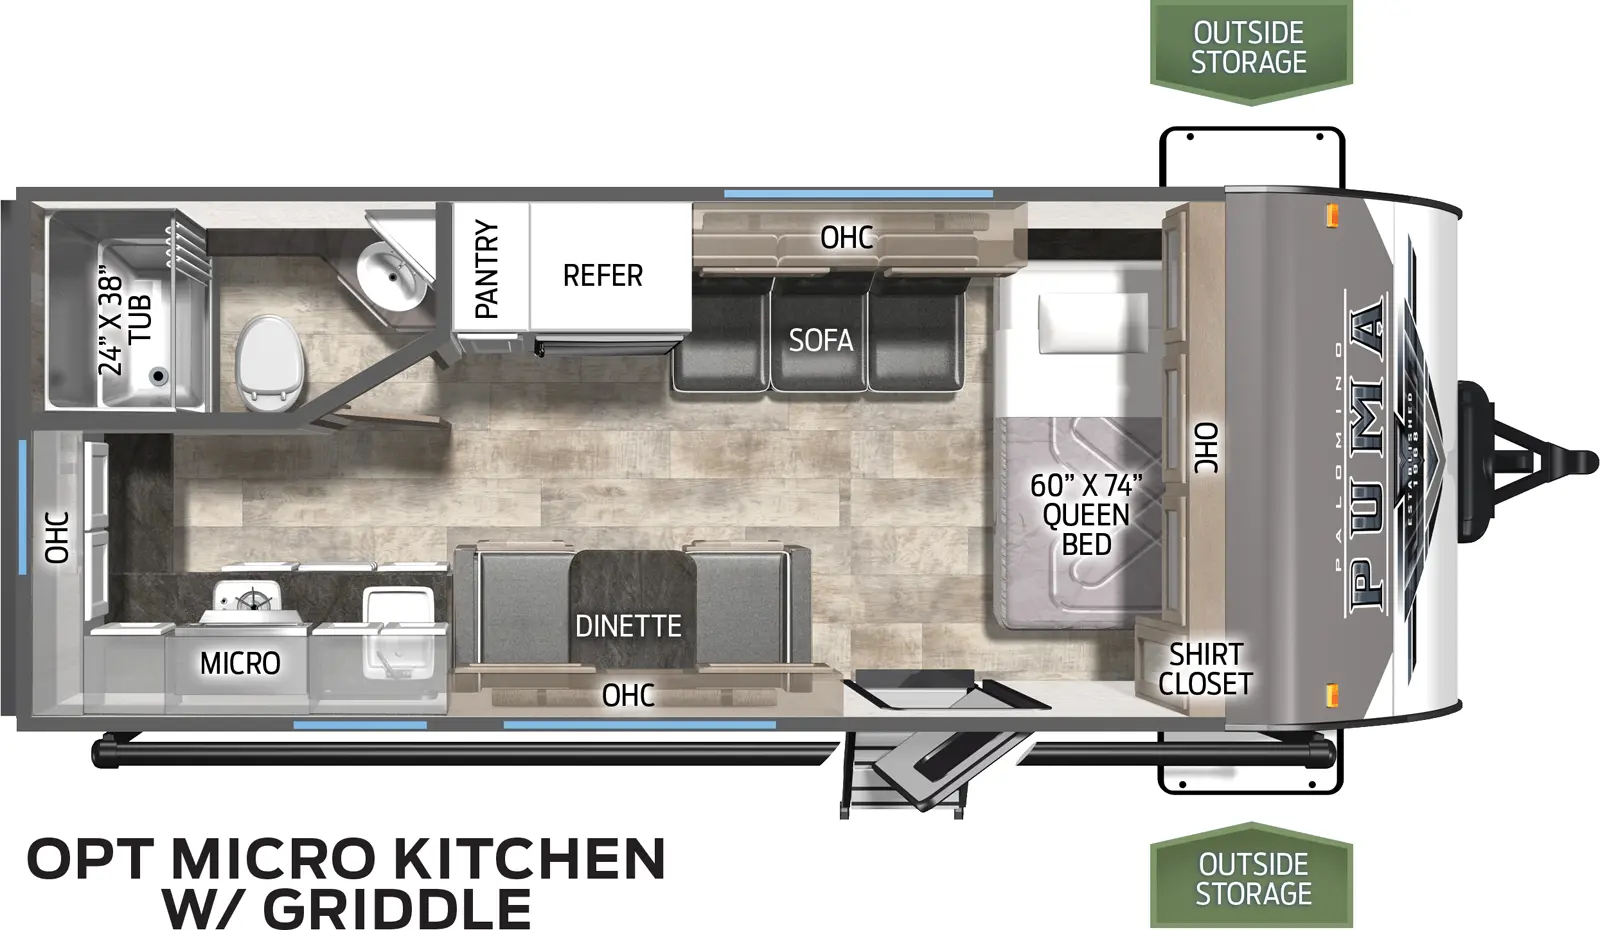 The 18RKX has zero slideouts and one entry. Exterior features front storage, awning, and optional outside kitchen. Interior layout front to back: side facing queen bed with overhead cabinet and shirt closet; off-door side sofa with overhead cabinet, refrigerator, and pantry; door side entry, dinette and overhead cabinet; rear off-door side full bathroom; rear door side kitchen with sink, overhead cabinet, microwave, cooktop, and countertop that wraps to the rear with more overhead cabinet space.